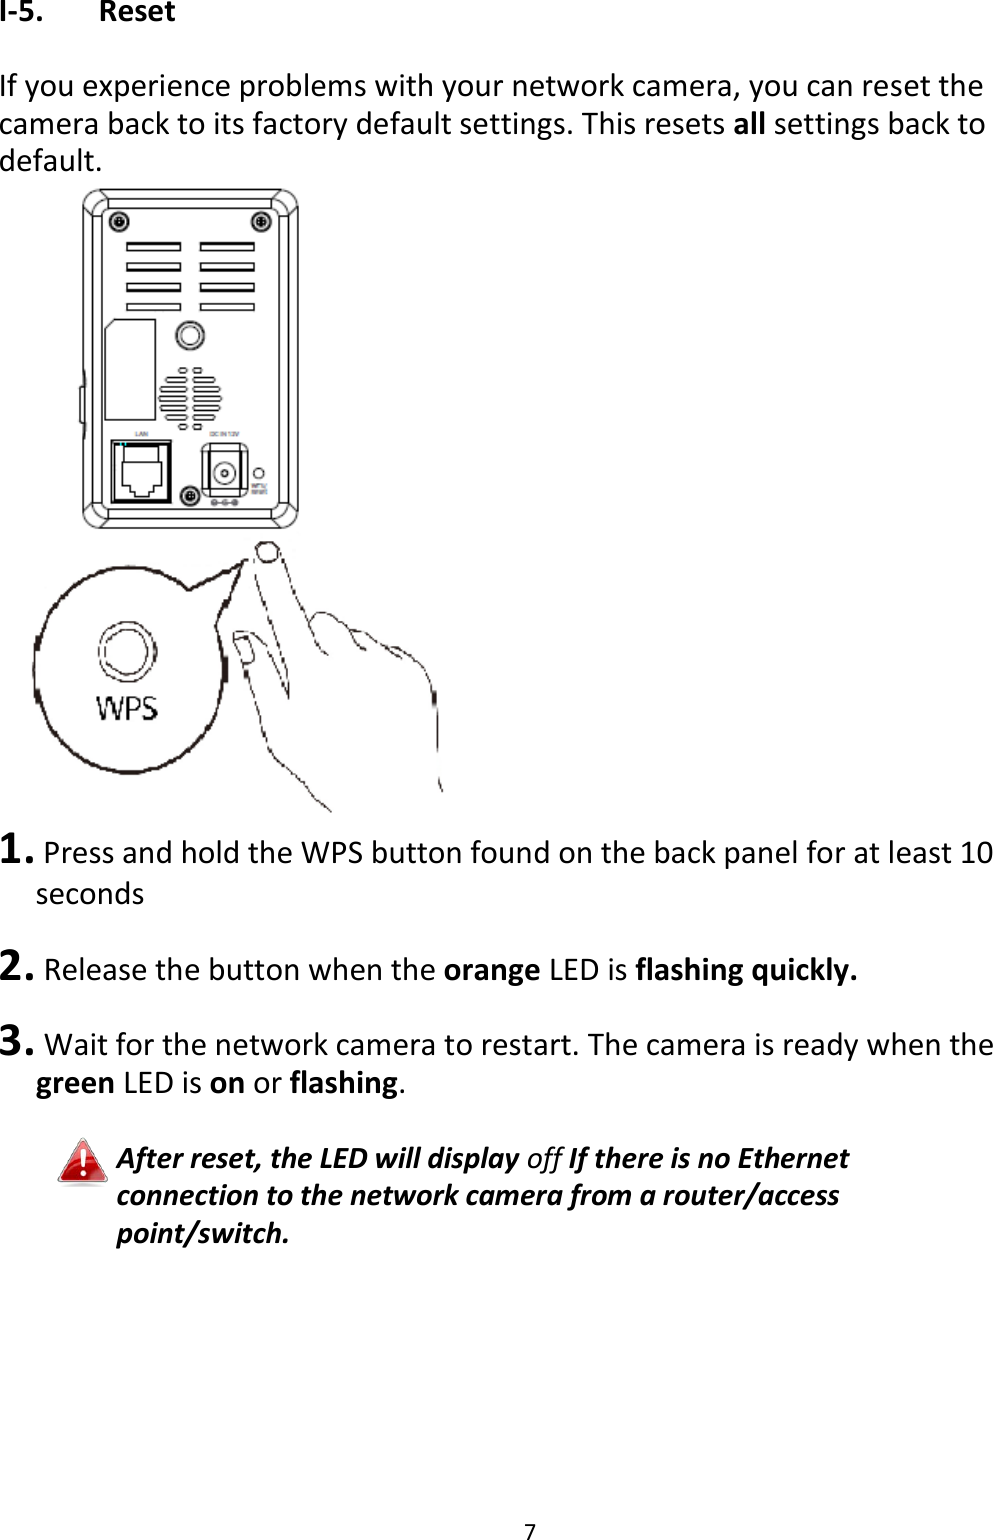 7  I-5.   Reset  If you experience problems with your network camera, you can reset the camera back to its factory default settings. This resets all settings back to default.   1. Press and hold the WPS button found on the back panel for at least 10 seconds  2.  Release the button when the orange LED is flashing quickly.  3.  Wait for the network camera to restart. The camera is ready when the green LED is on or flashing.  After reset, the LED will display off If there is no Ethernet connection to the network camera from a router/access point/switch.  